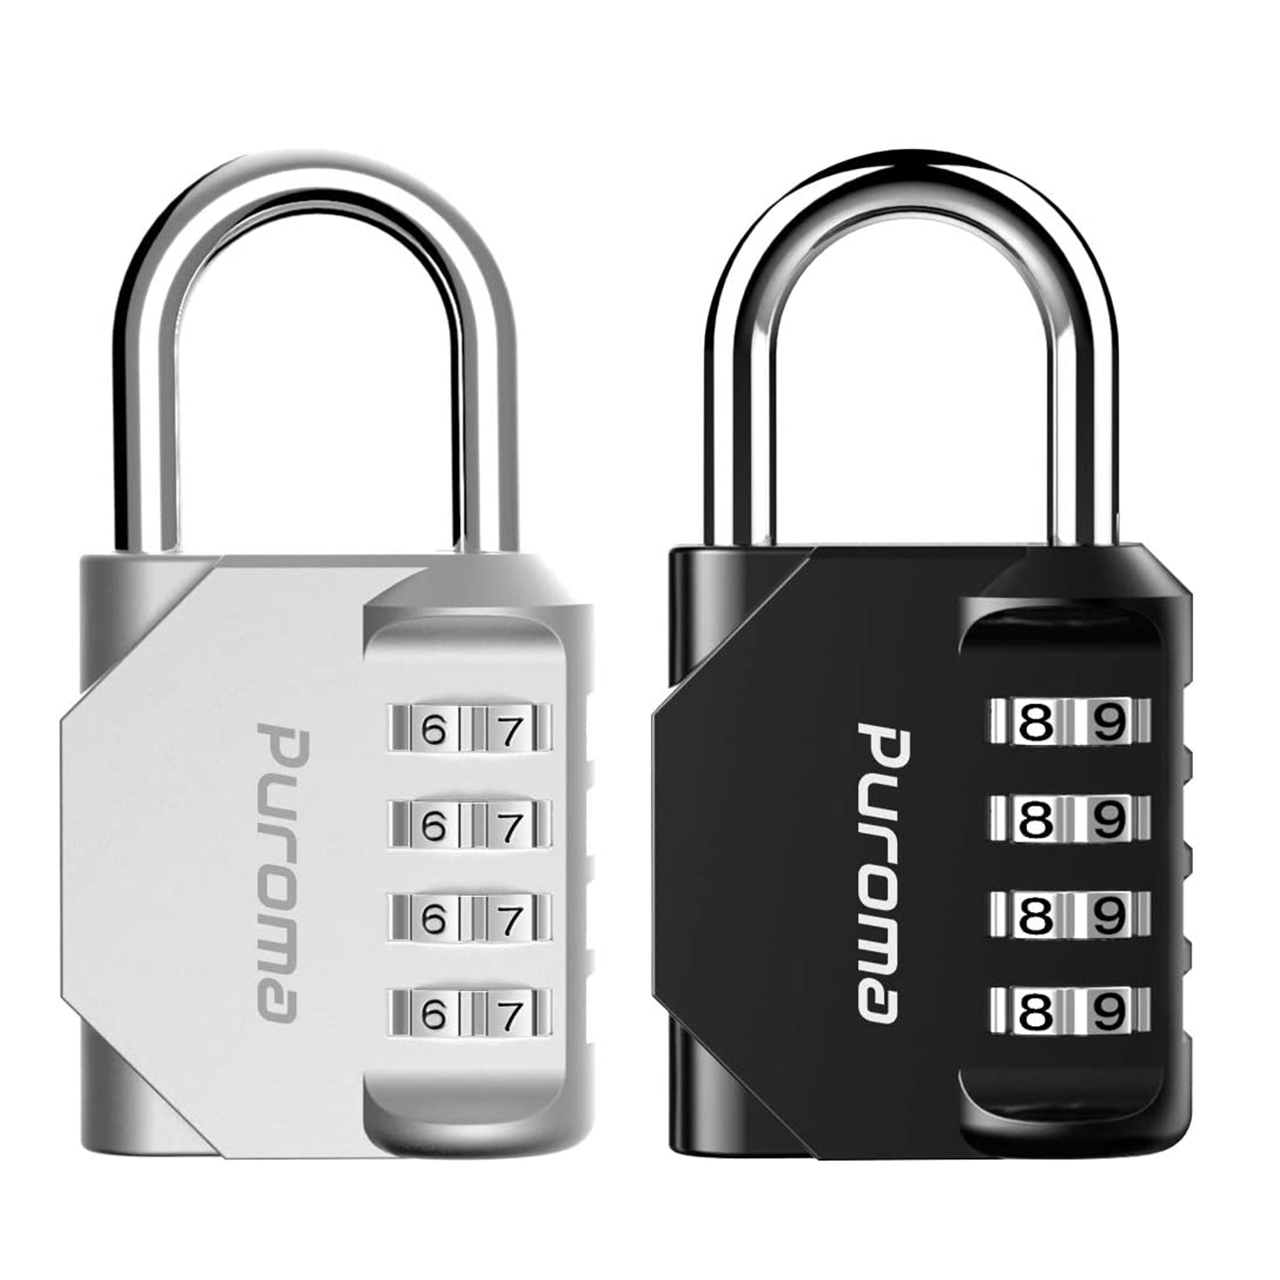 Toolbox 4 Digit Re-settable Security Padlock Silver Upgraded Version Combination Lock, Storage Combination Padlock Set for School Gym or Sports Locker 2 Packs 